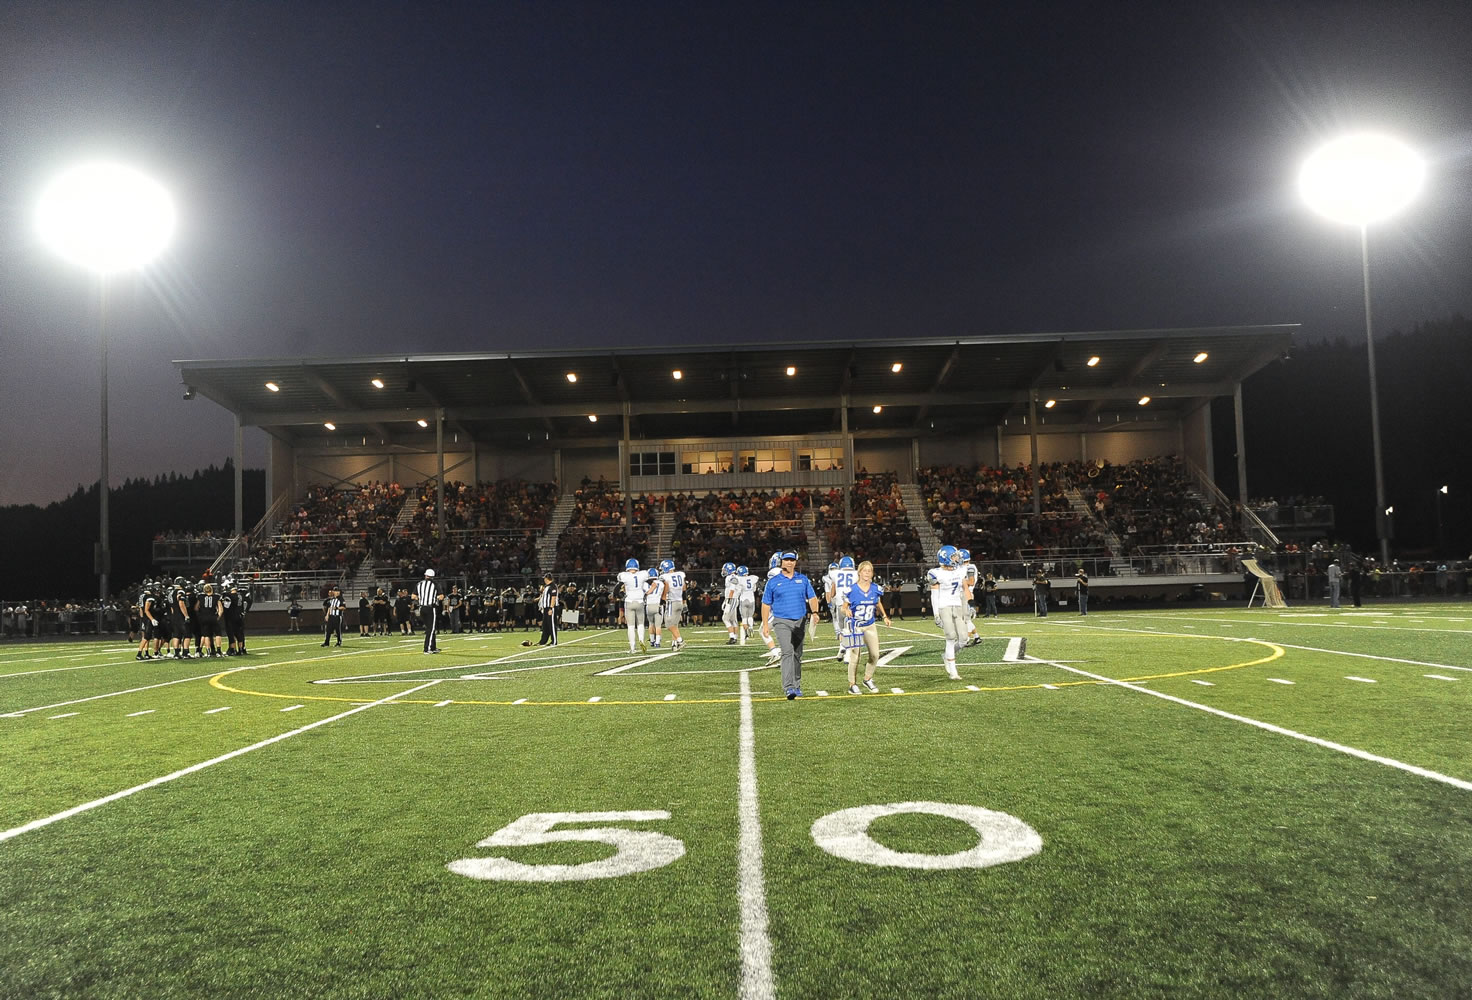 A football game La Center vs Woodland Friday September 11, 2015. This was the first game at Woodland's new stadium.